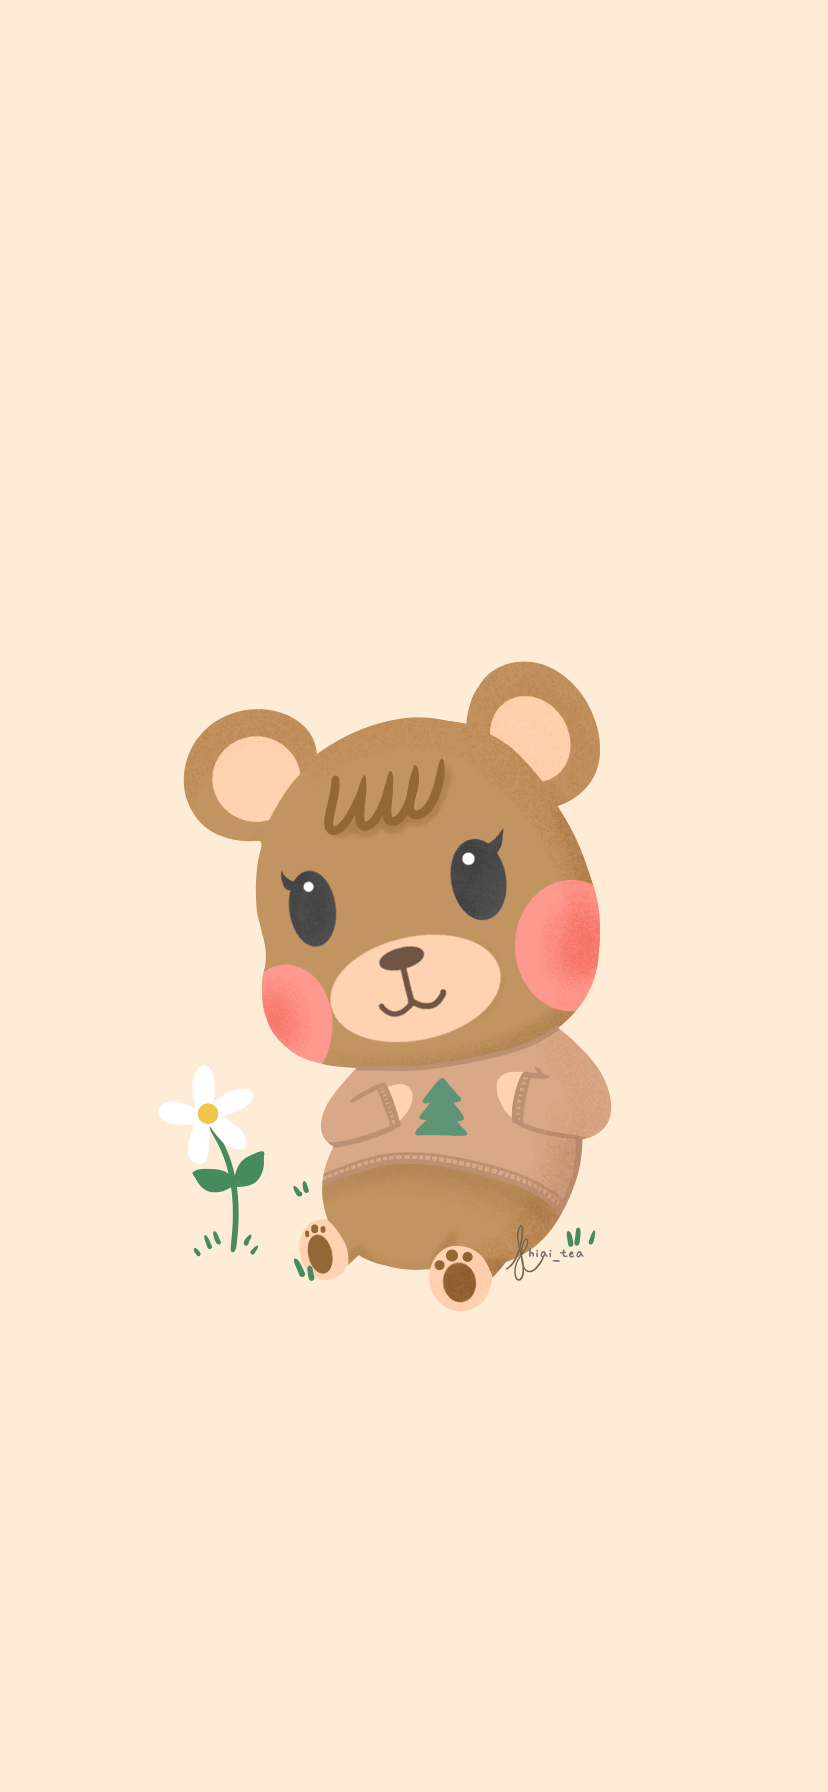 Made a Maple wallpaper! Happy birthday to the sweetest cub ❤️